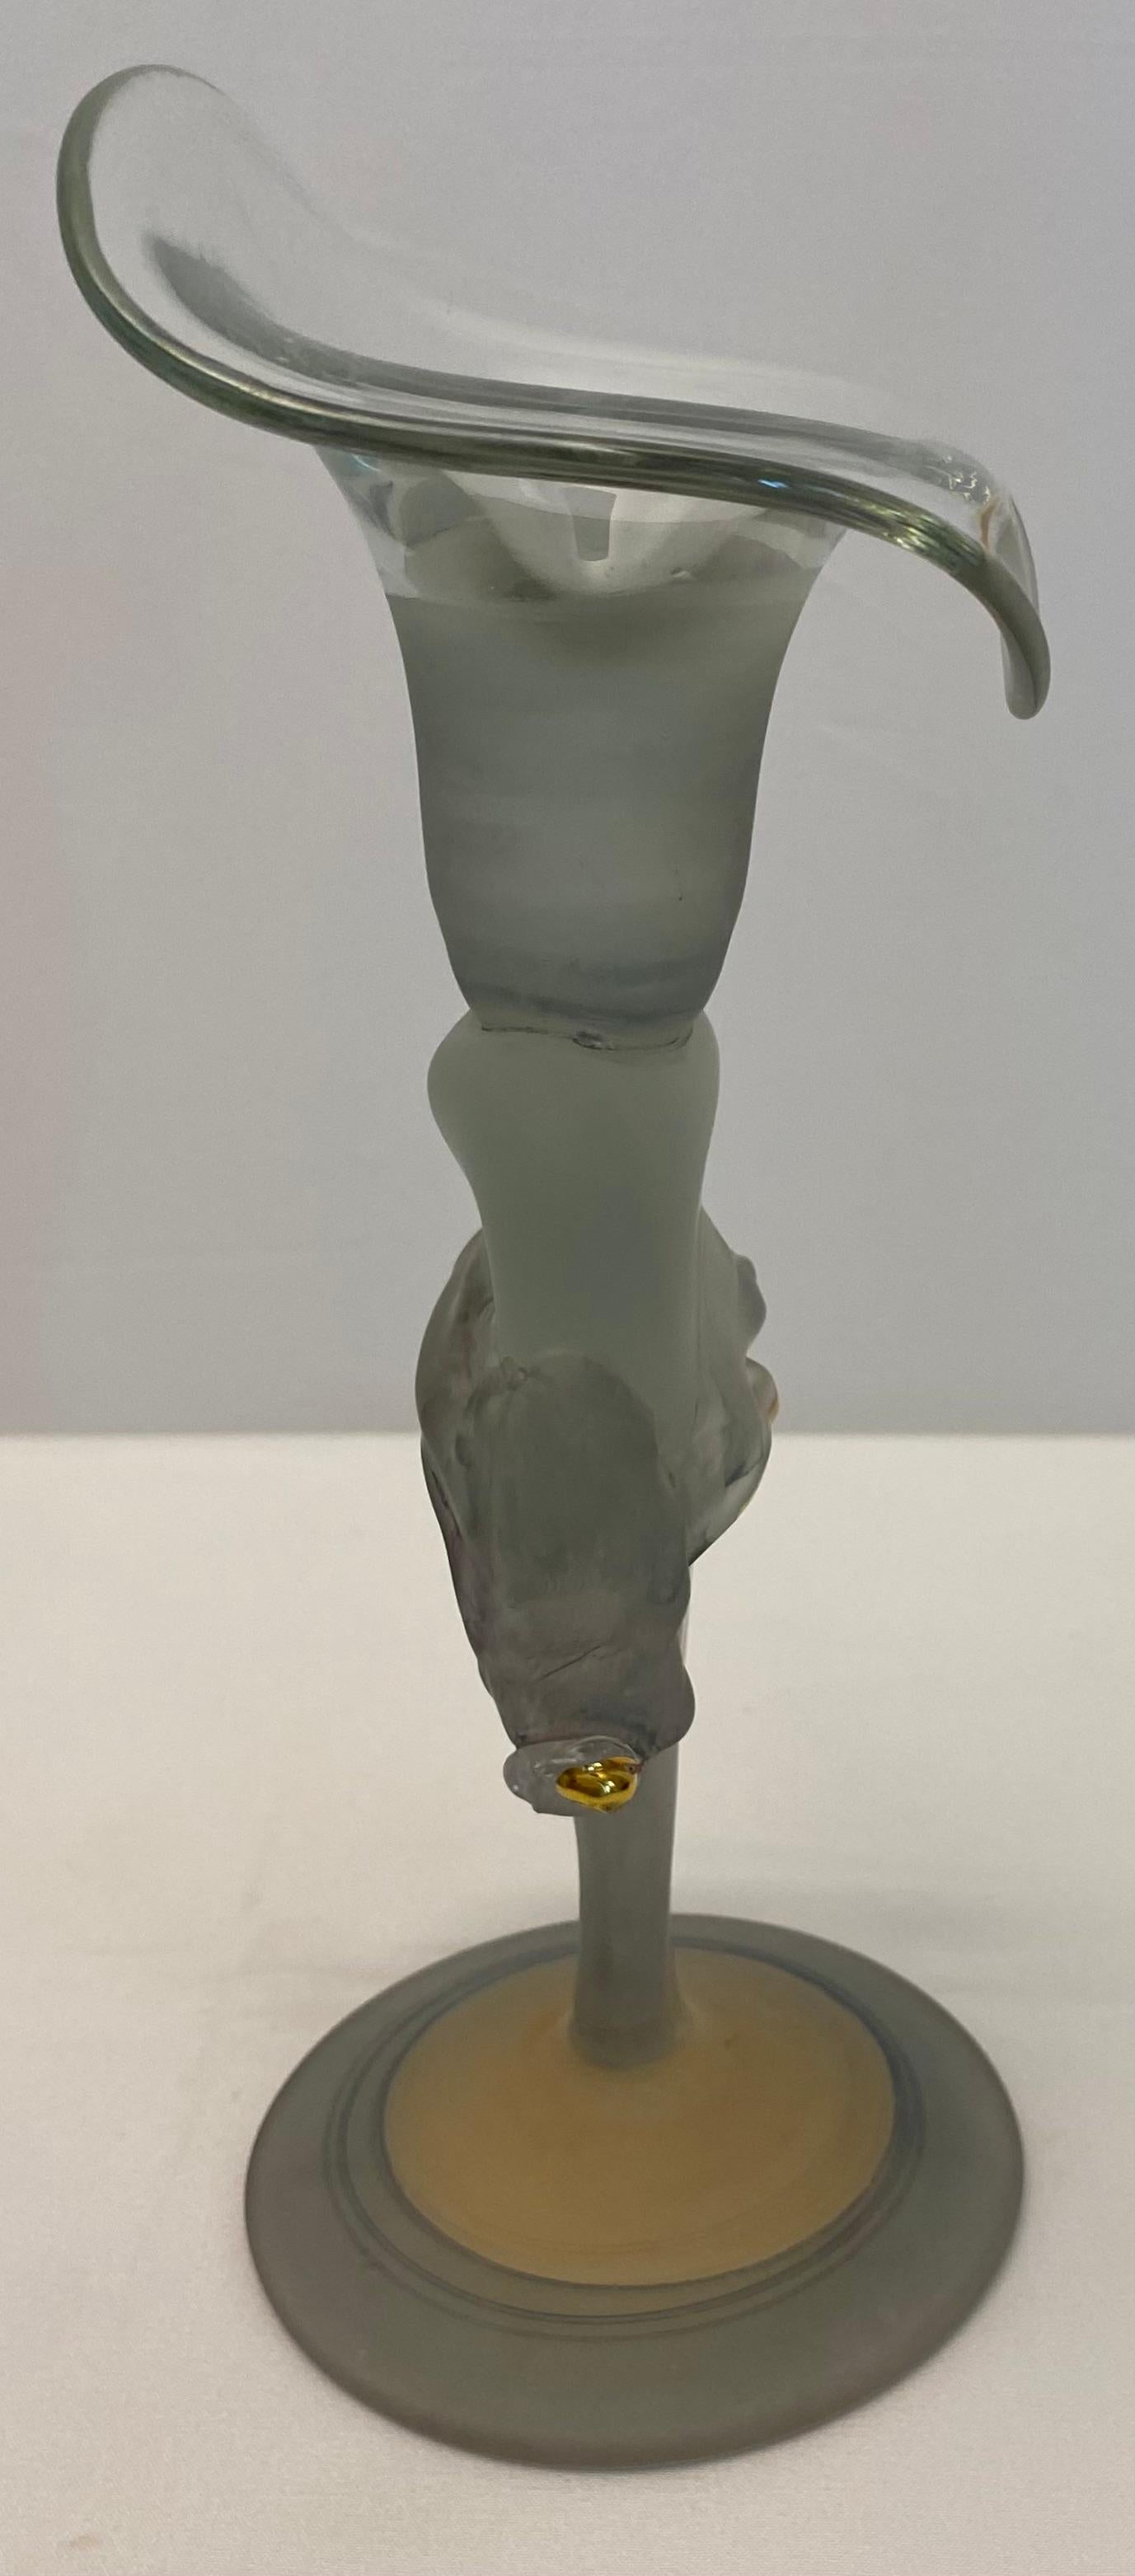 French Art Deco Style Glass Bud Vase Manner Erte Elte Vase In Good Condition For Sale In Miami, FL